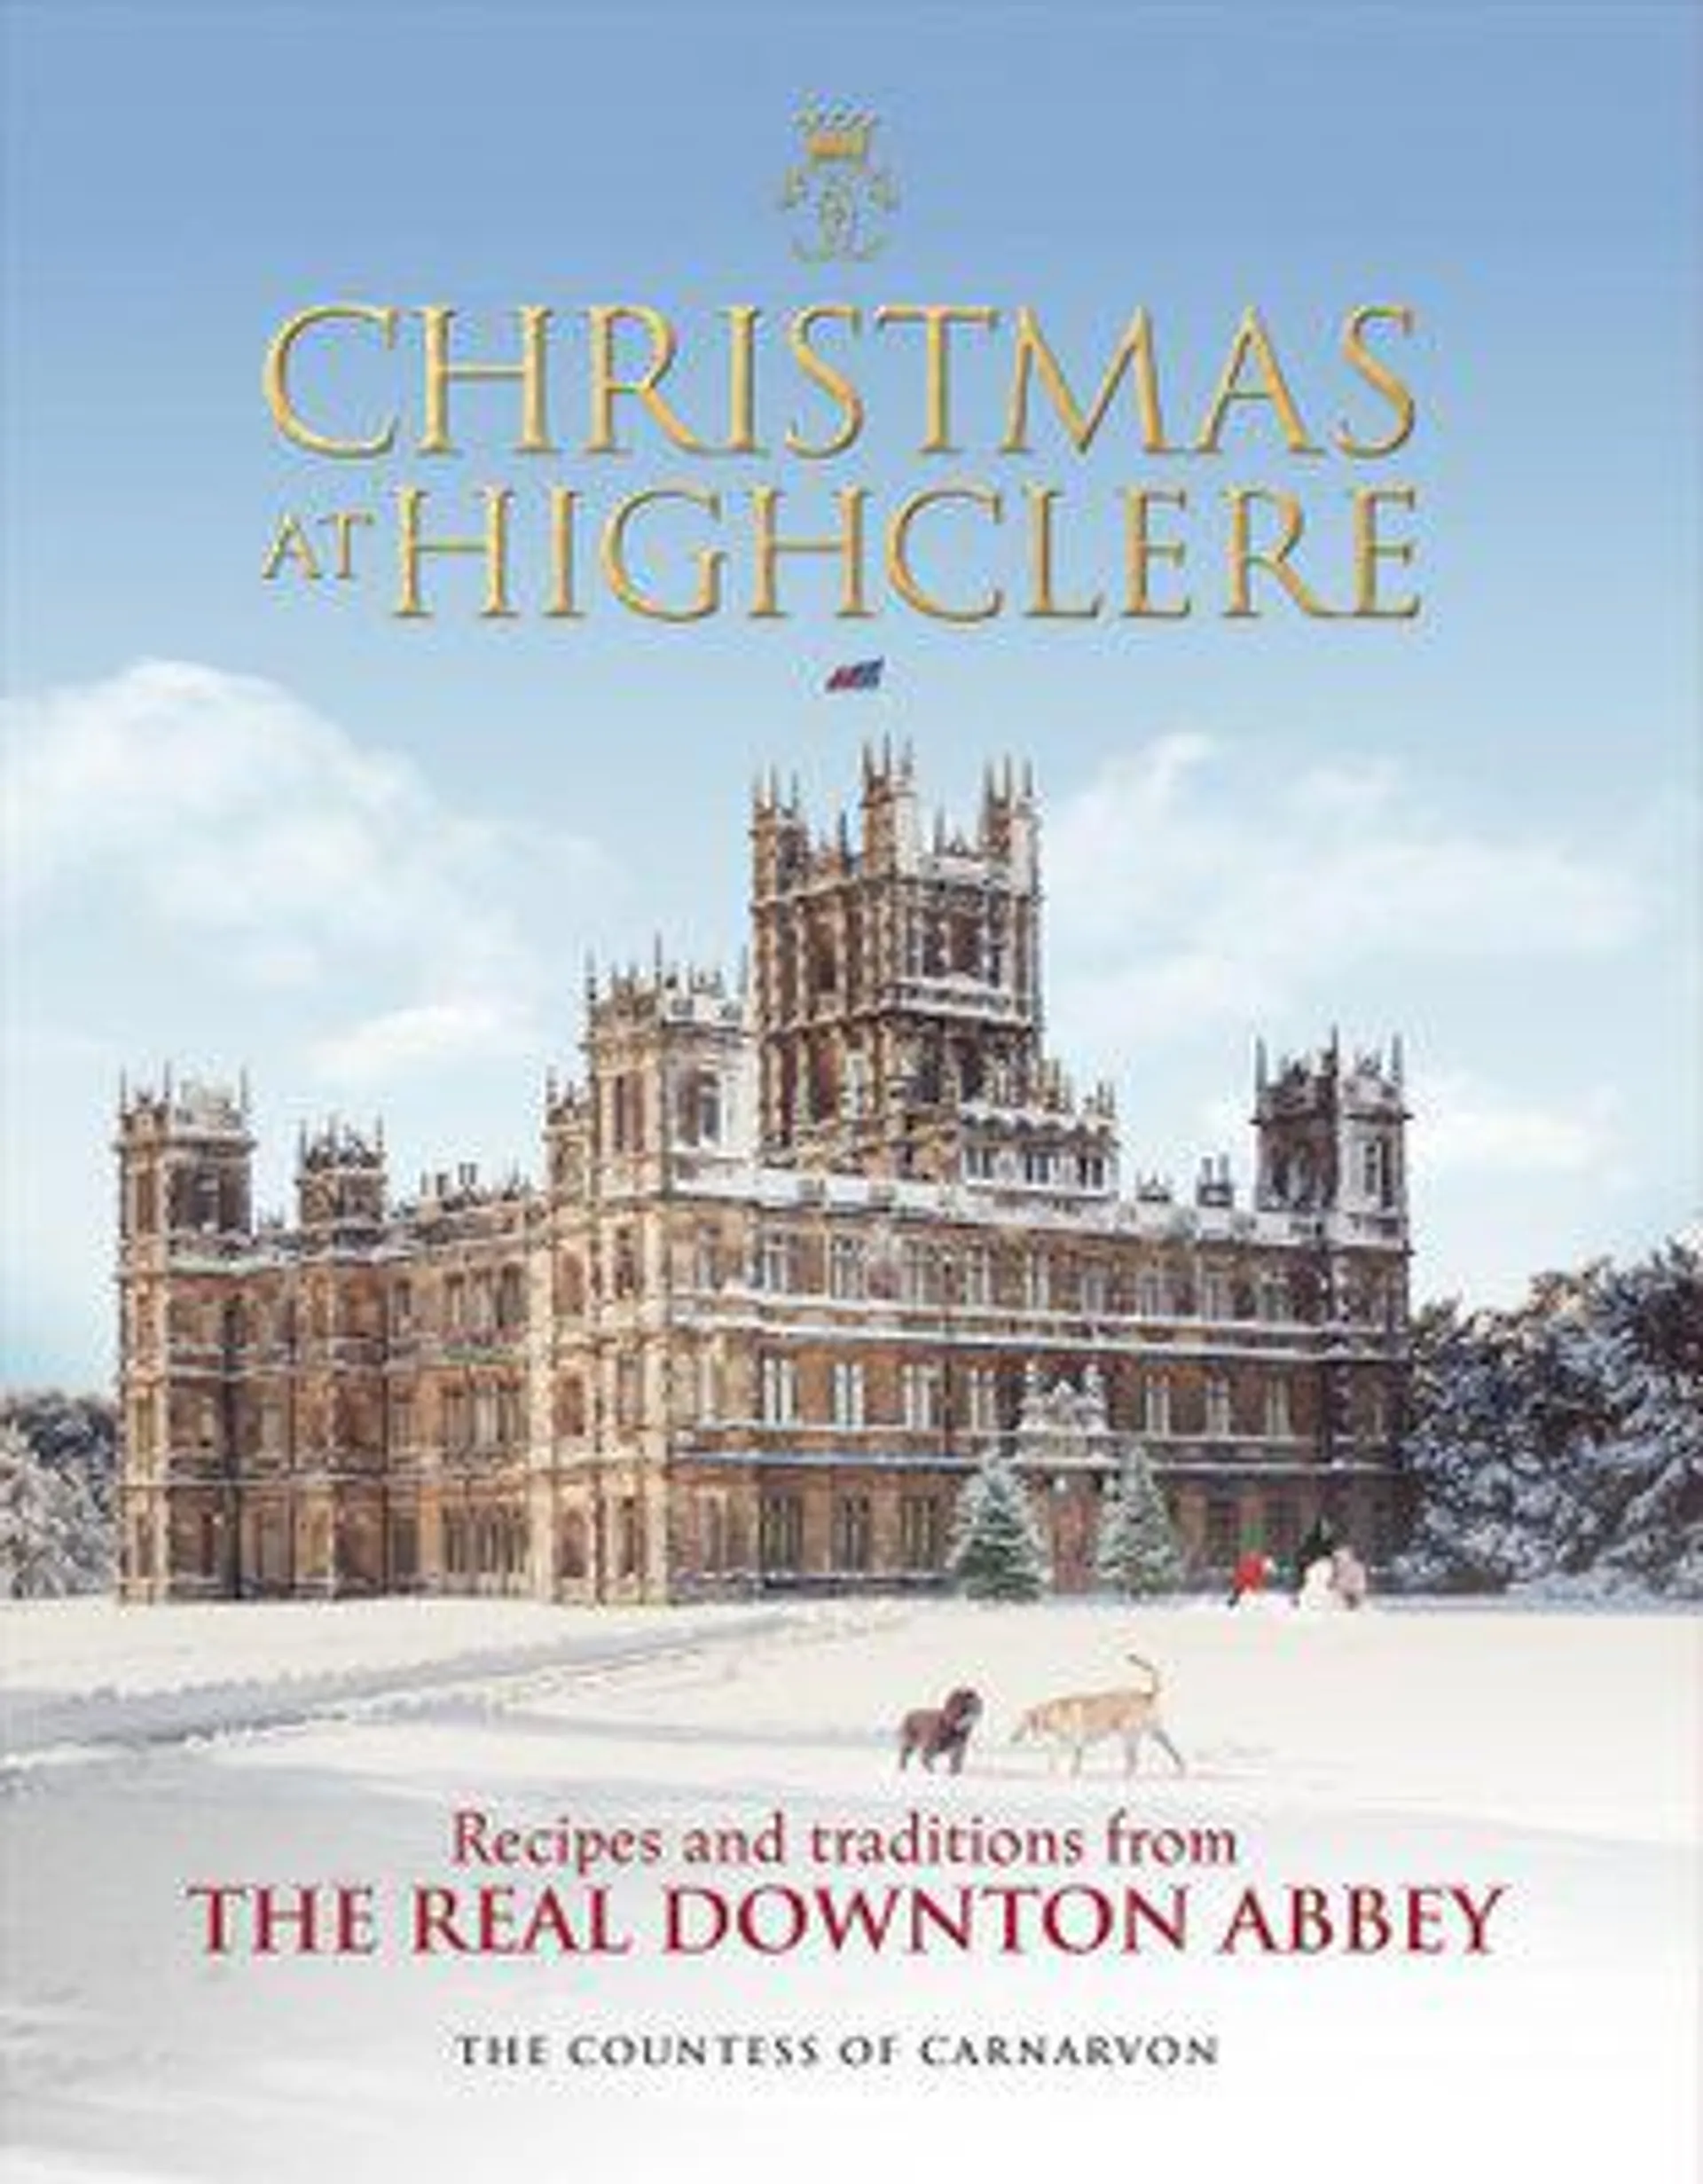 : Recipes and traditions from the real Downton Abbey